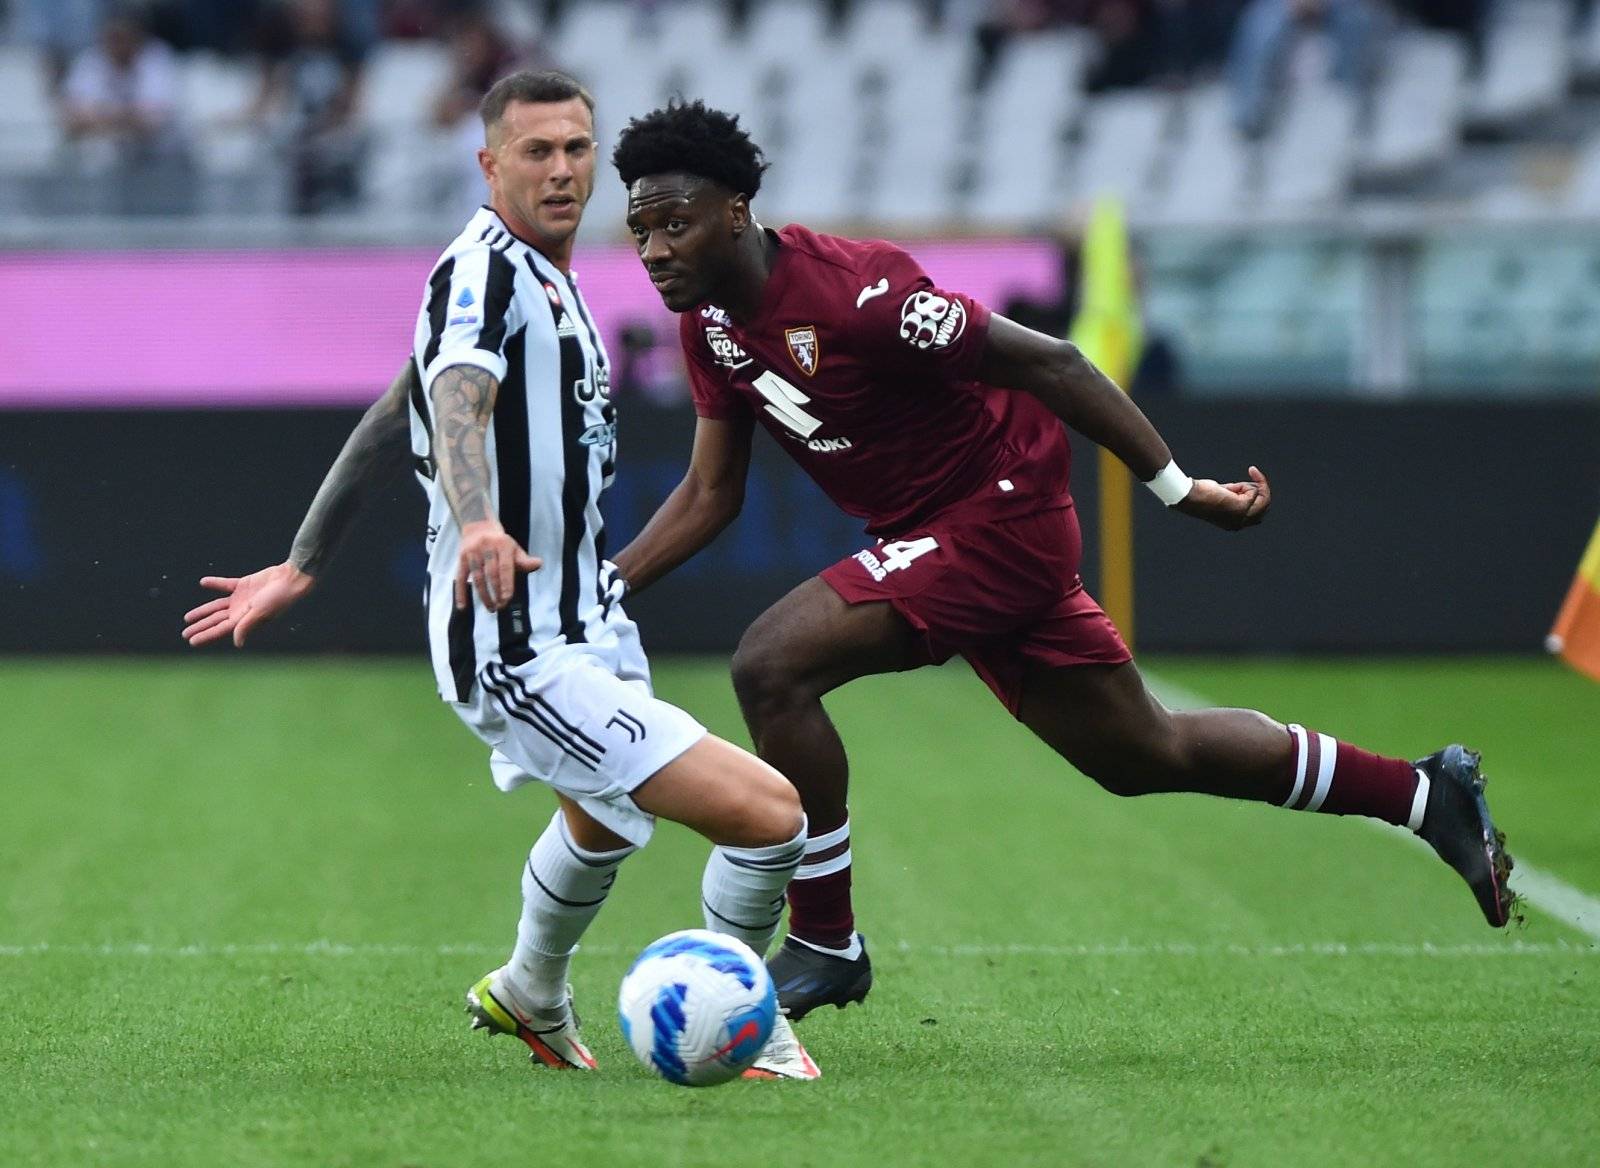 Leeds interested in Ola Aina for possible free transfer - Leeds United News